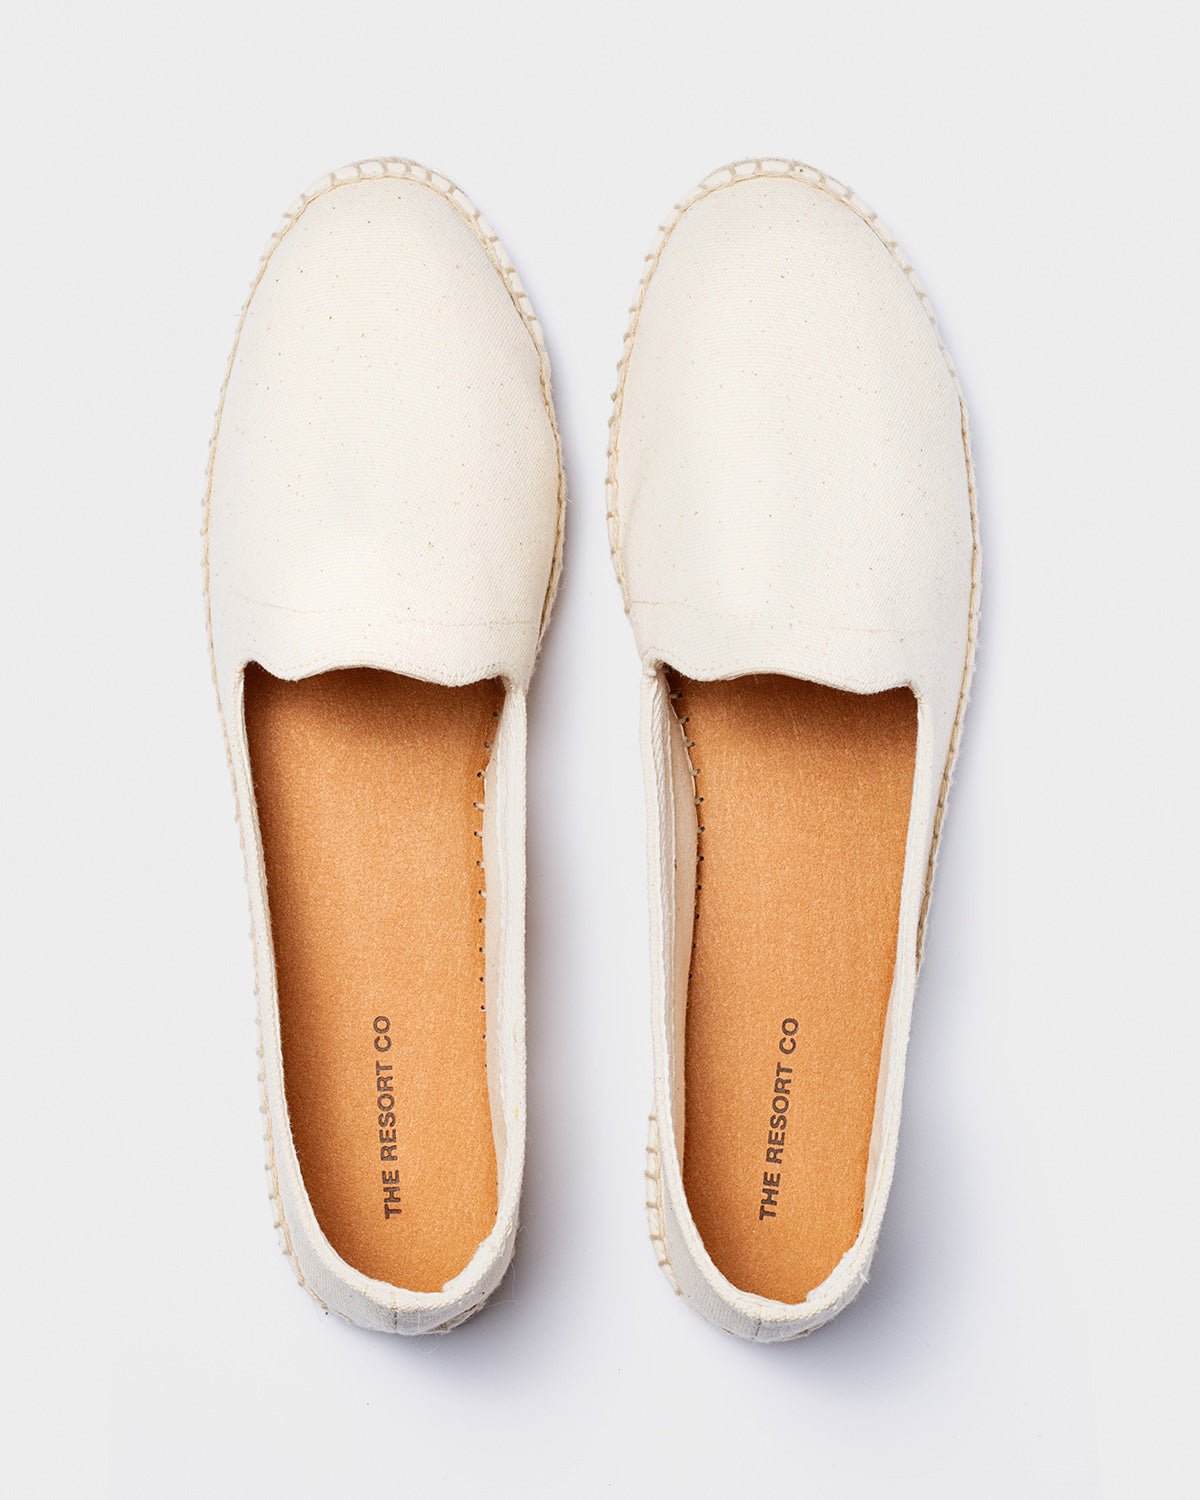 Espadrilles Ivory Canvas - THE RESORT CO